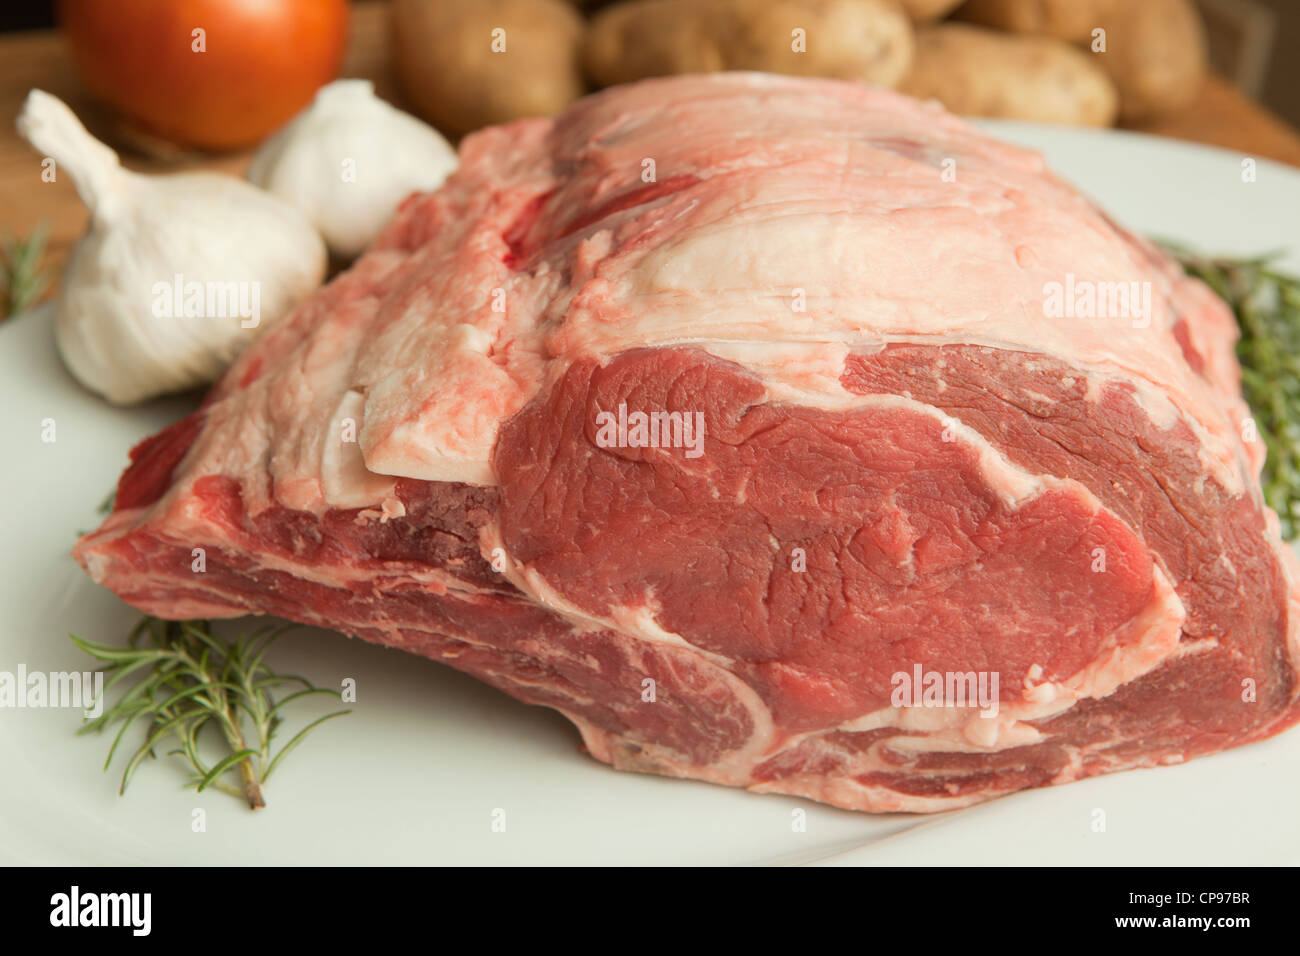 Close up view of whole bone in prime rib beef roast. Stock Photo